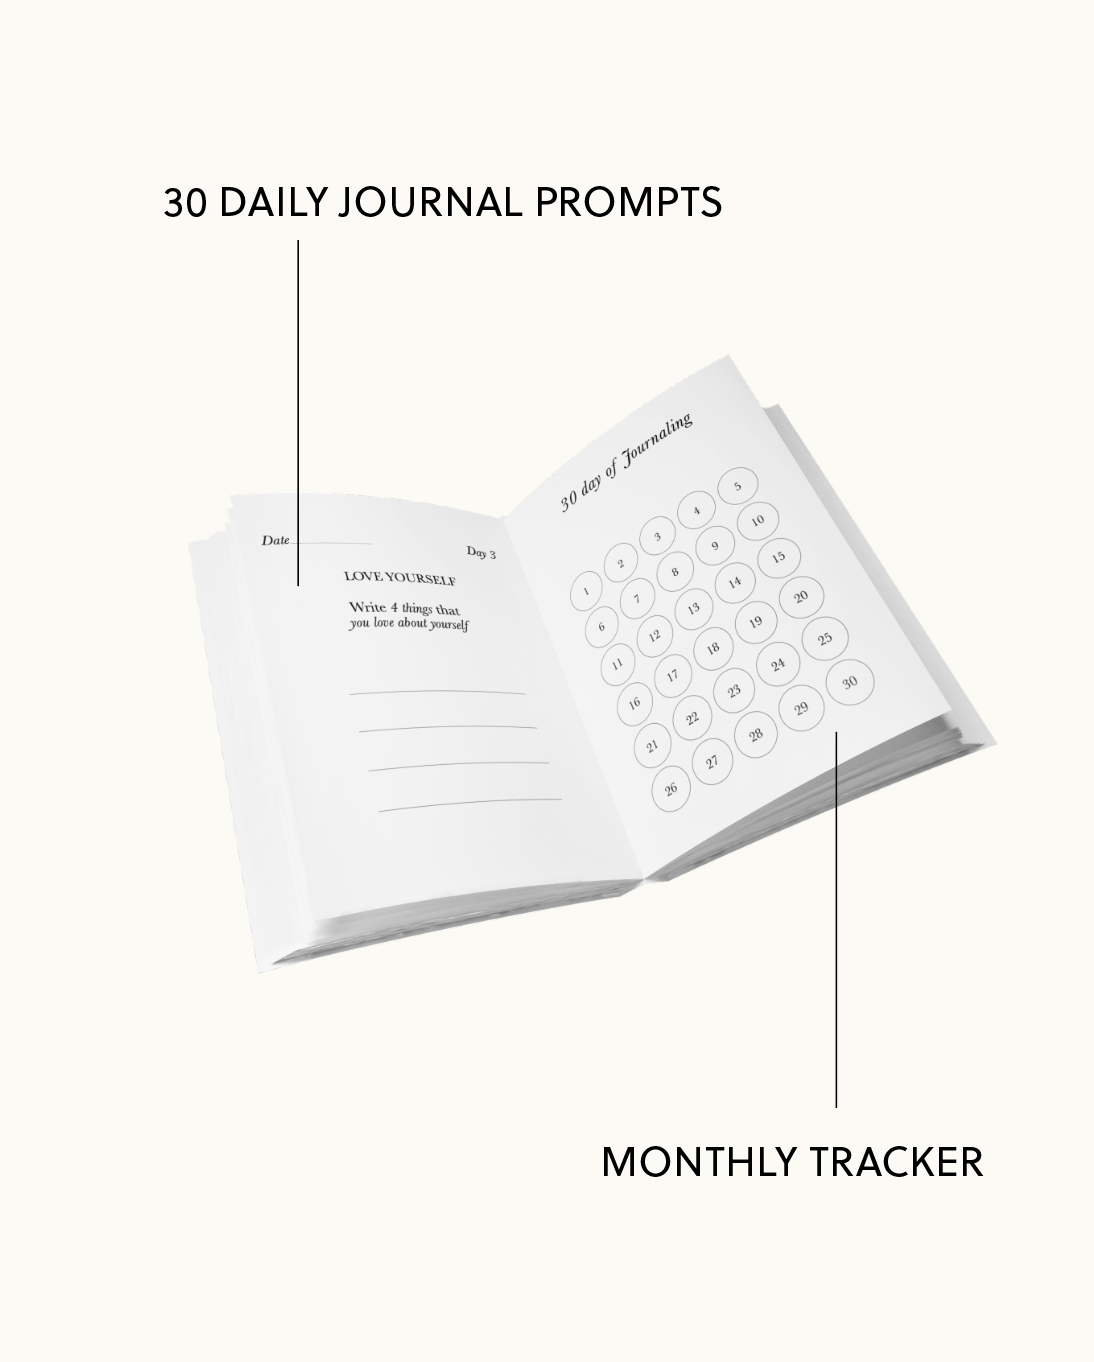 Introduction to journaling - 1 prompt a day for 30 days (Blue Nova)